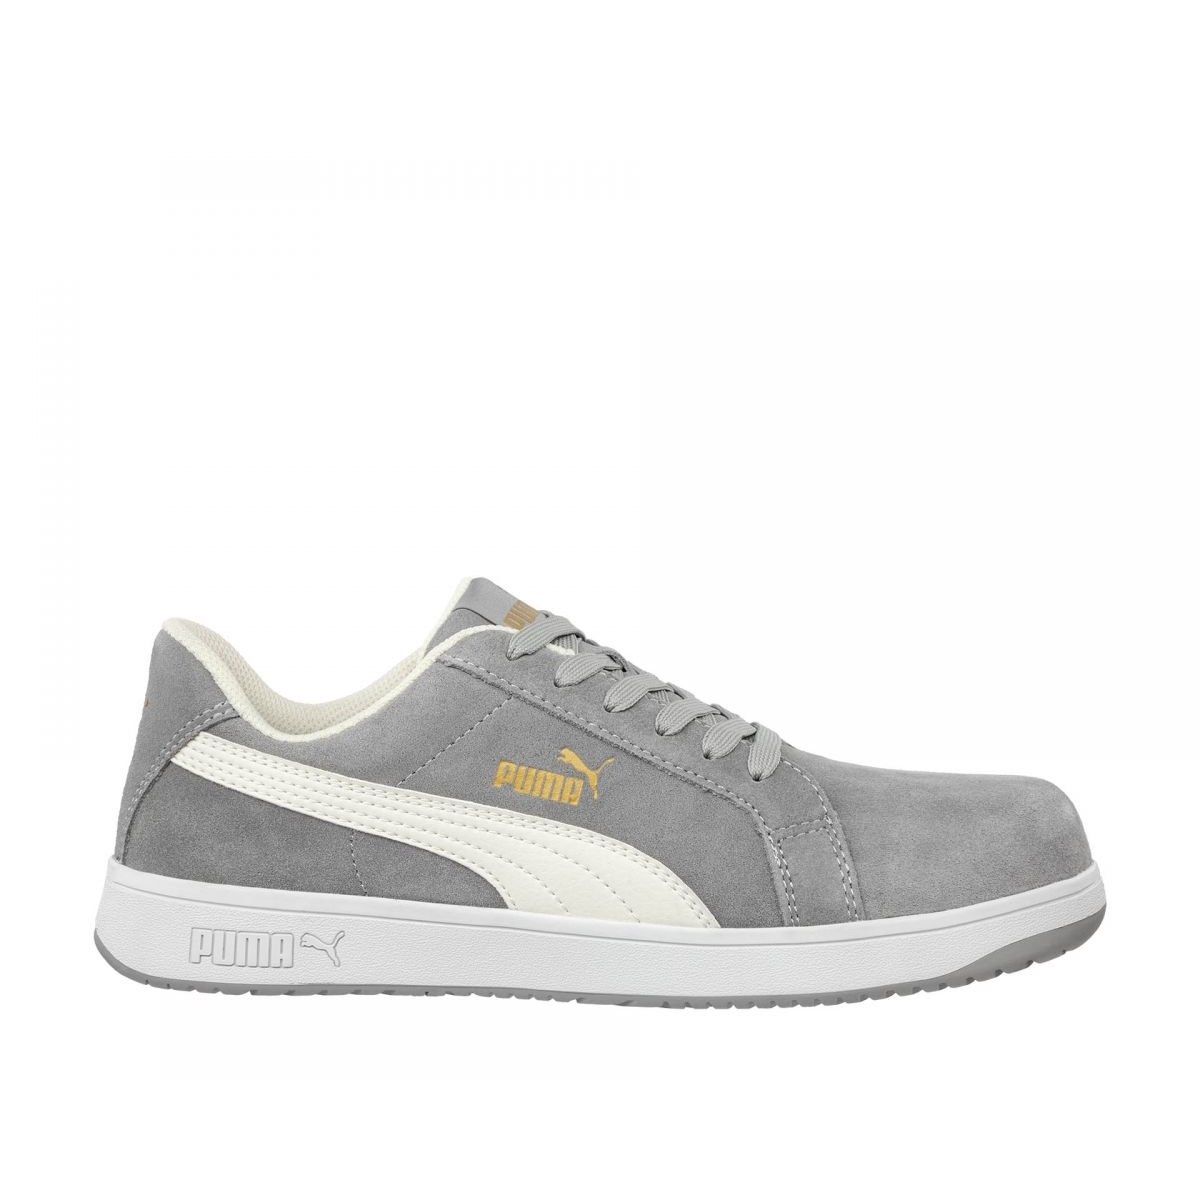 Puma Work Safety PUMA Safety Mens Iconic Low Composite Toe SD Work Shoes Grey Suede - 640035 Grey